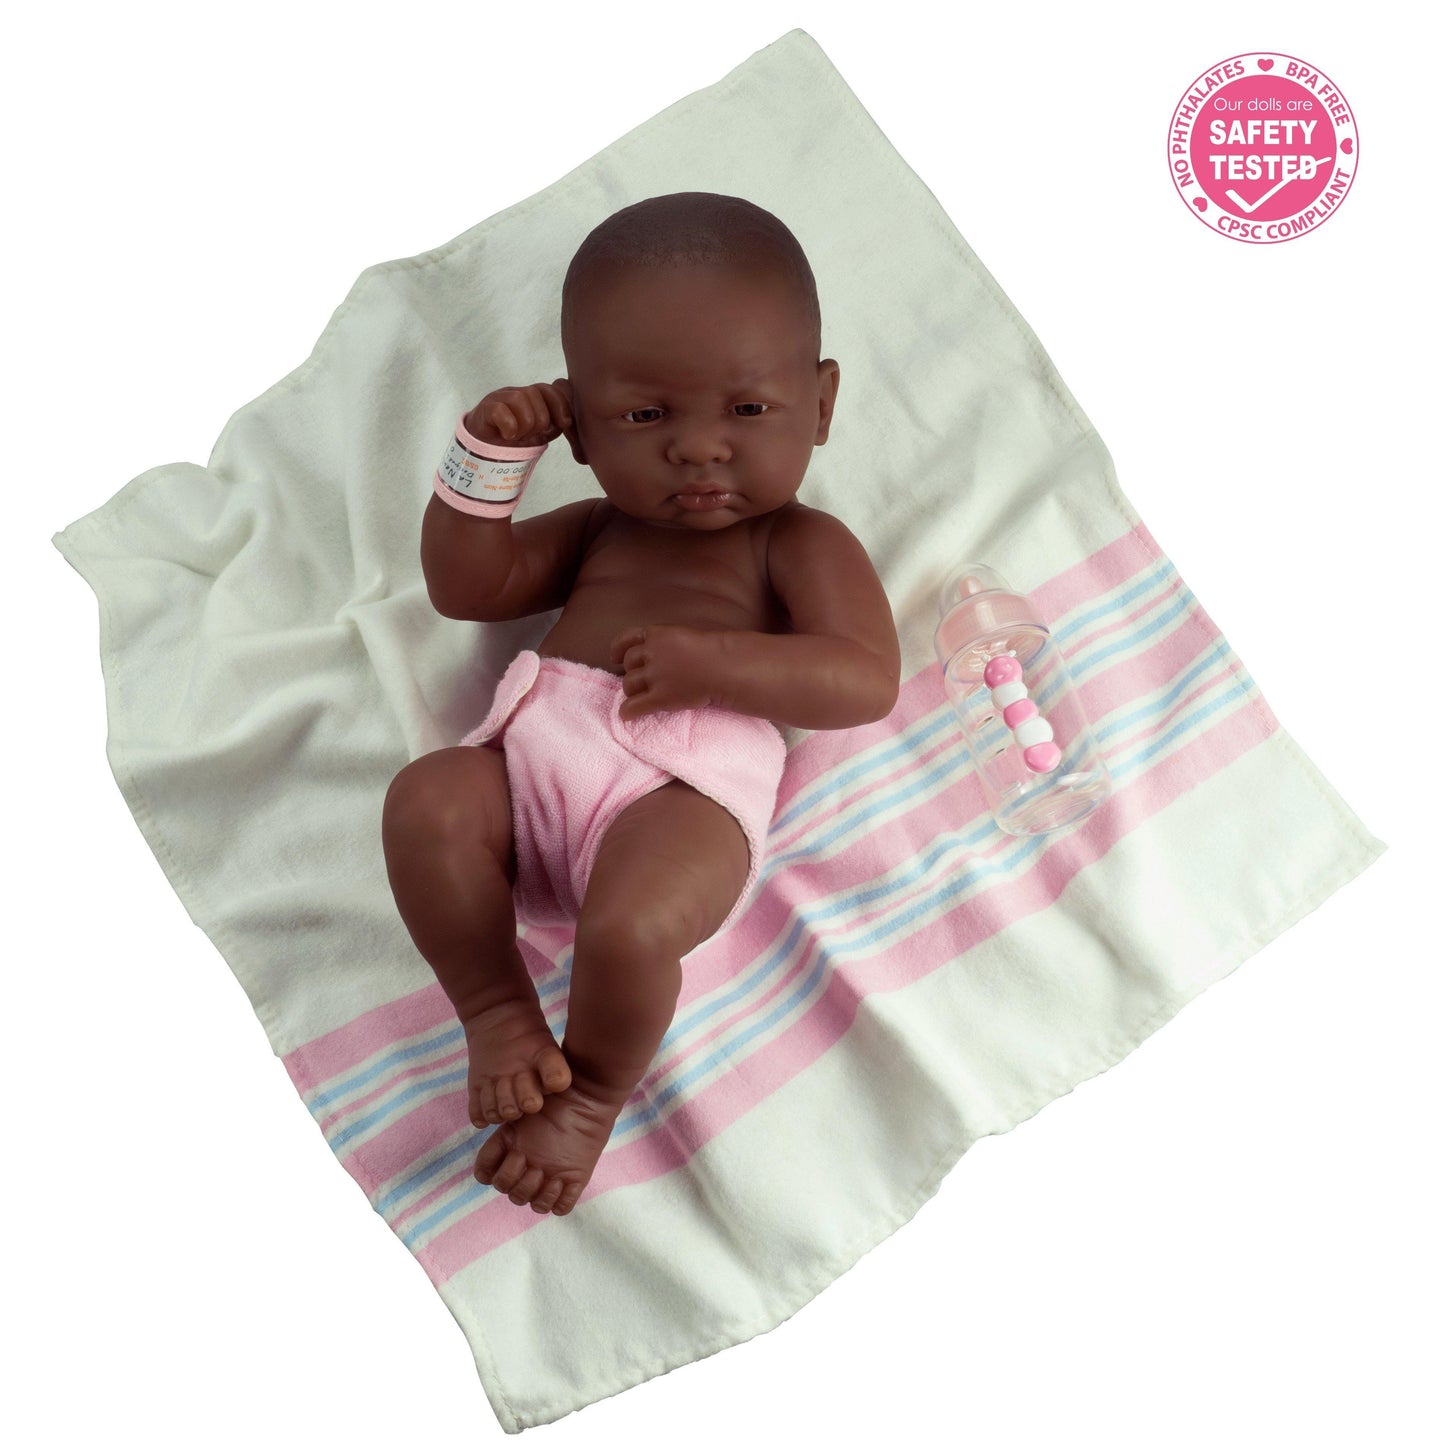 La Newborn African American "First Day" 15" Real Girl - JC Toys Group Inc.